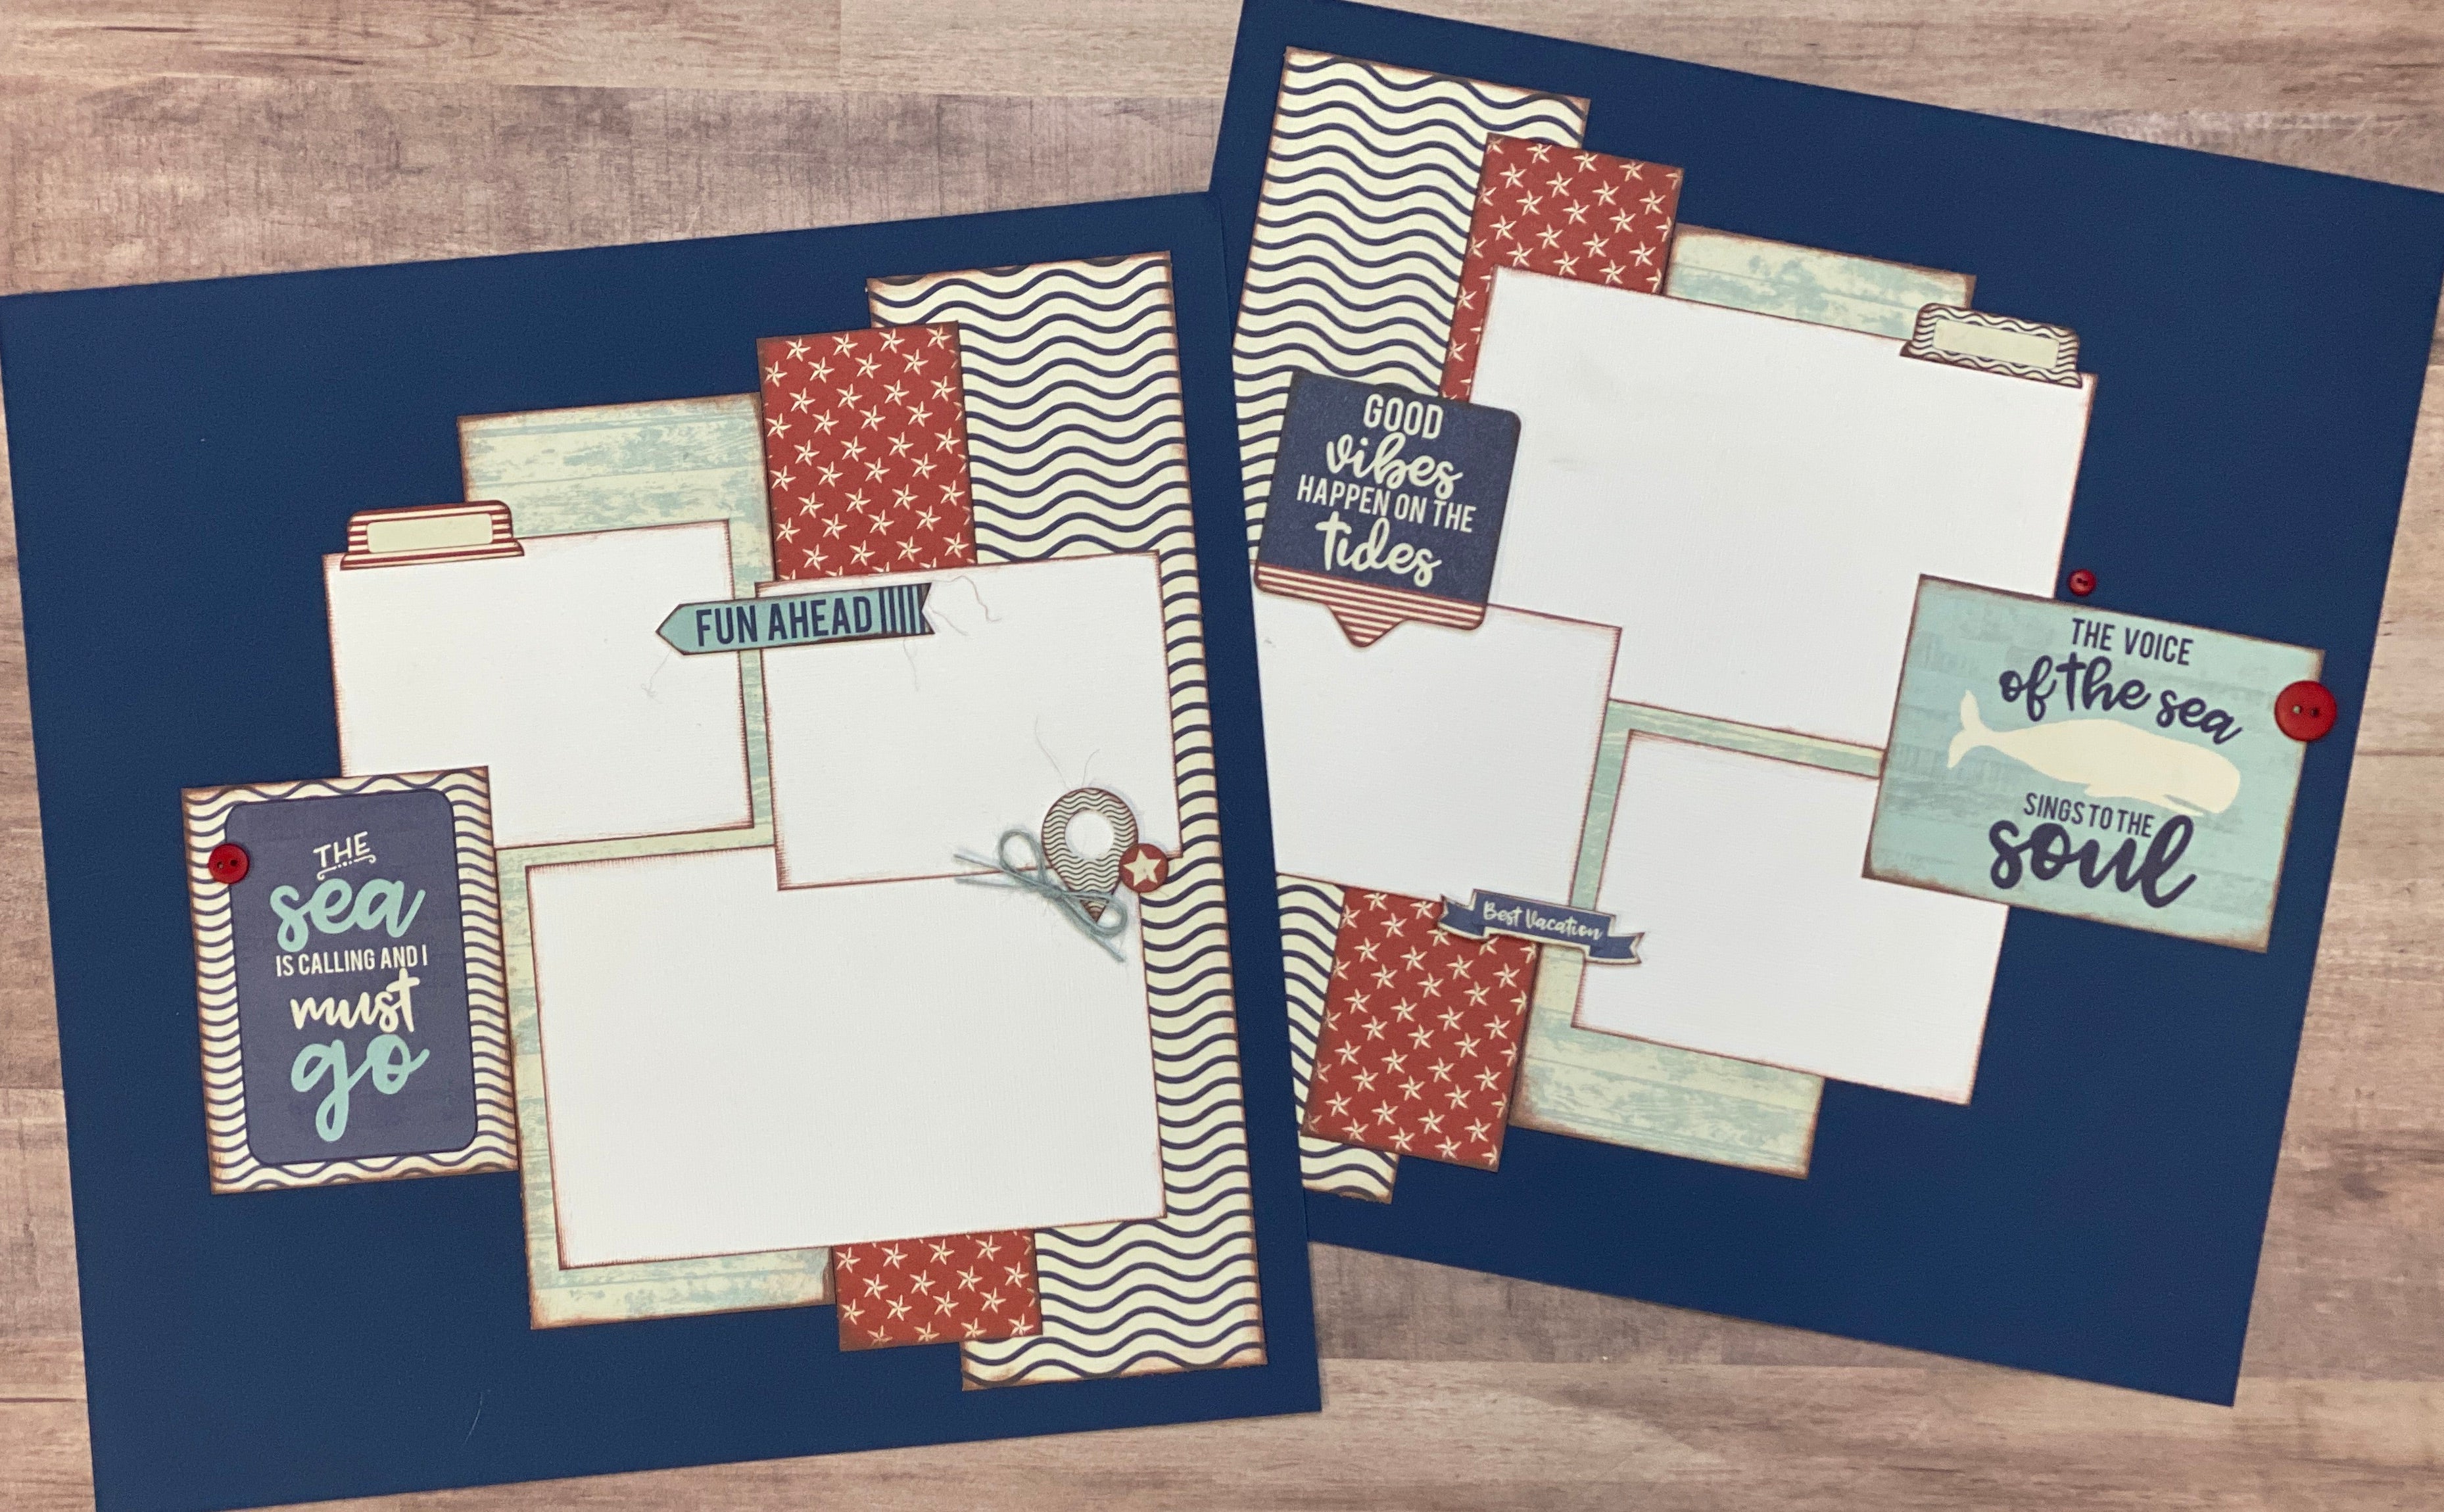 USA - We The People,Travel themed 2 page Scrapbooking Layout Kit